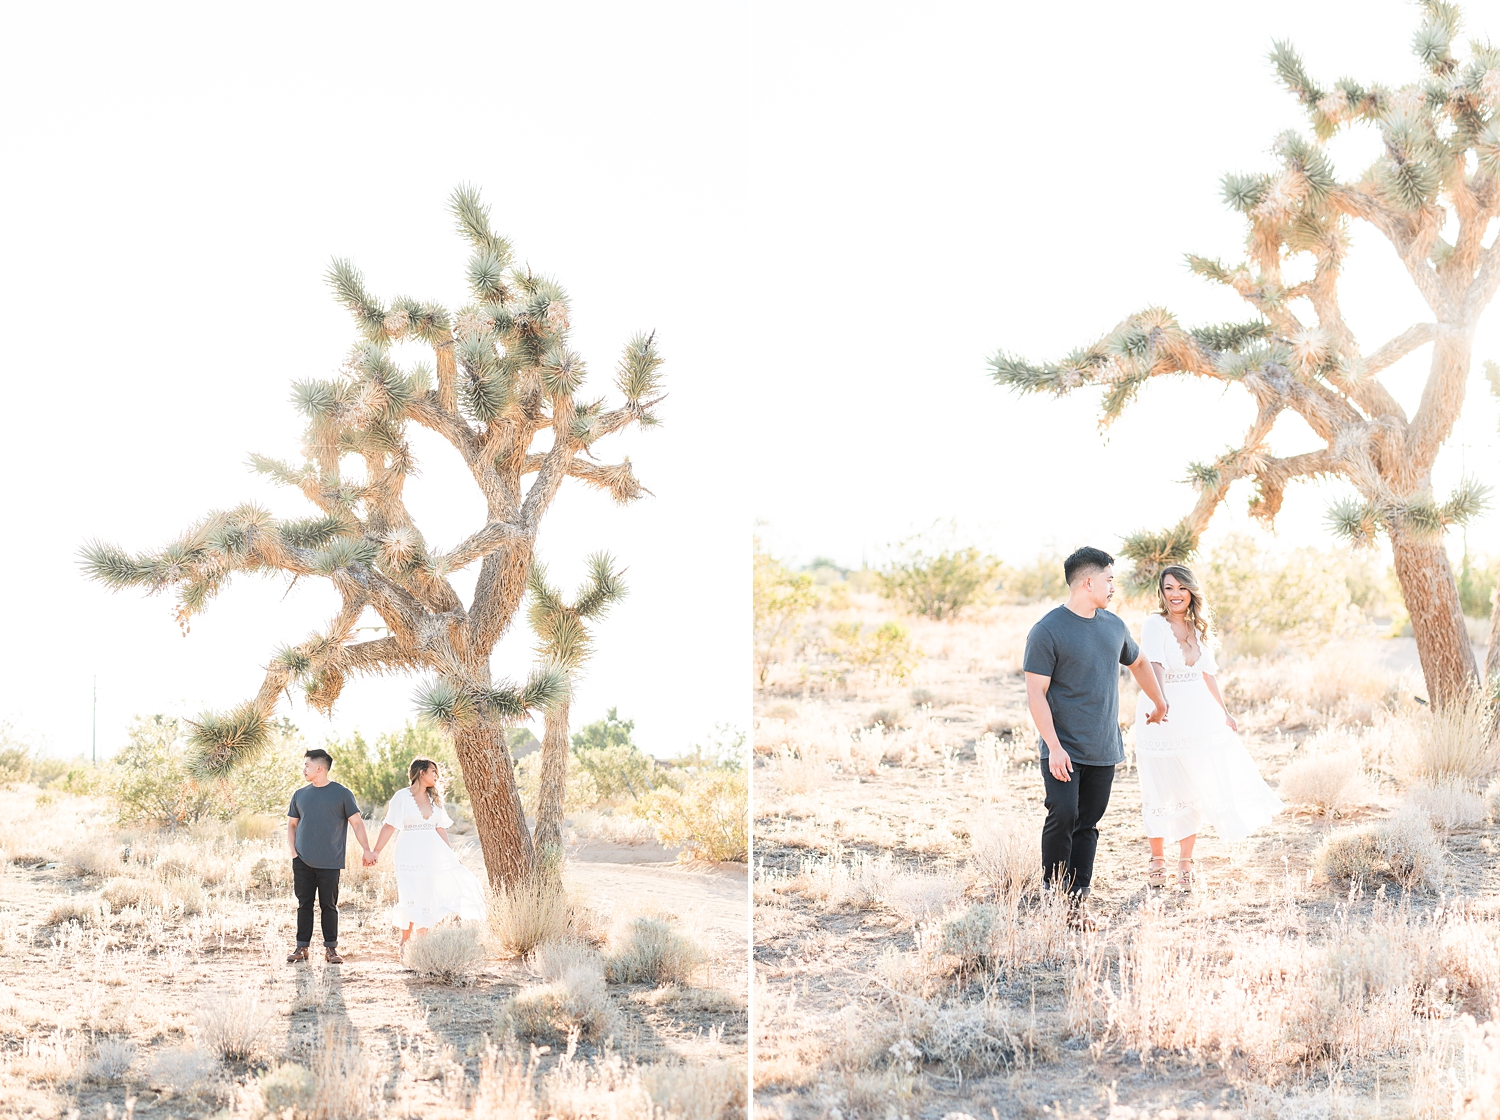 location ideas for engagement photos in southern california_0156.jpg